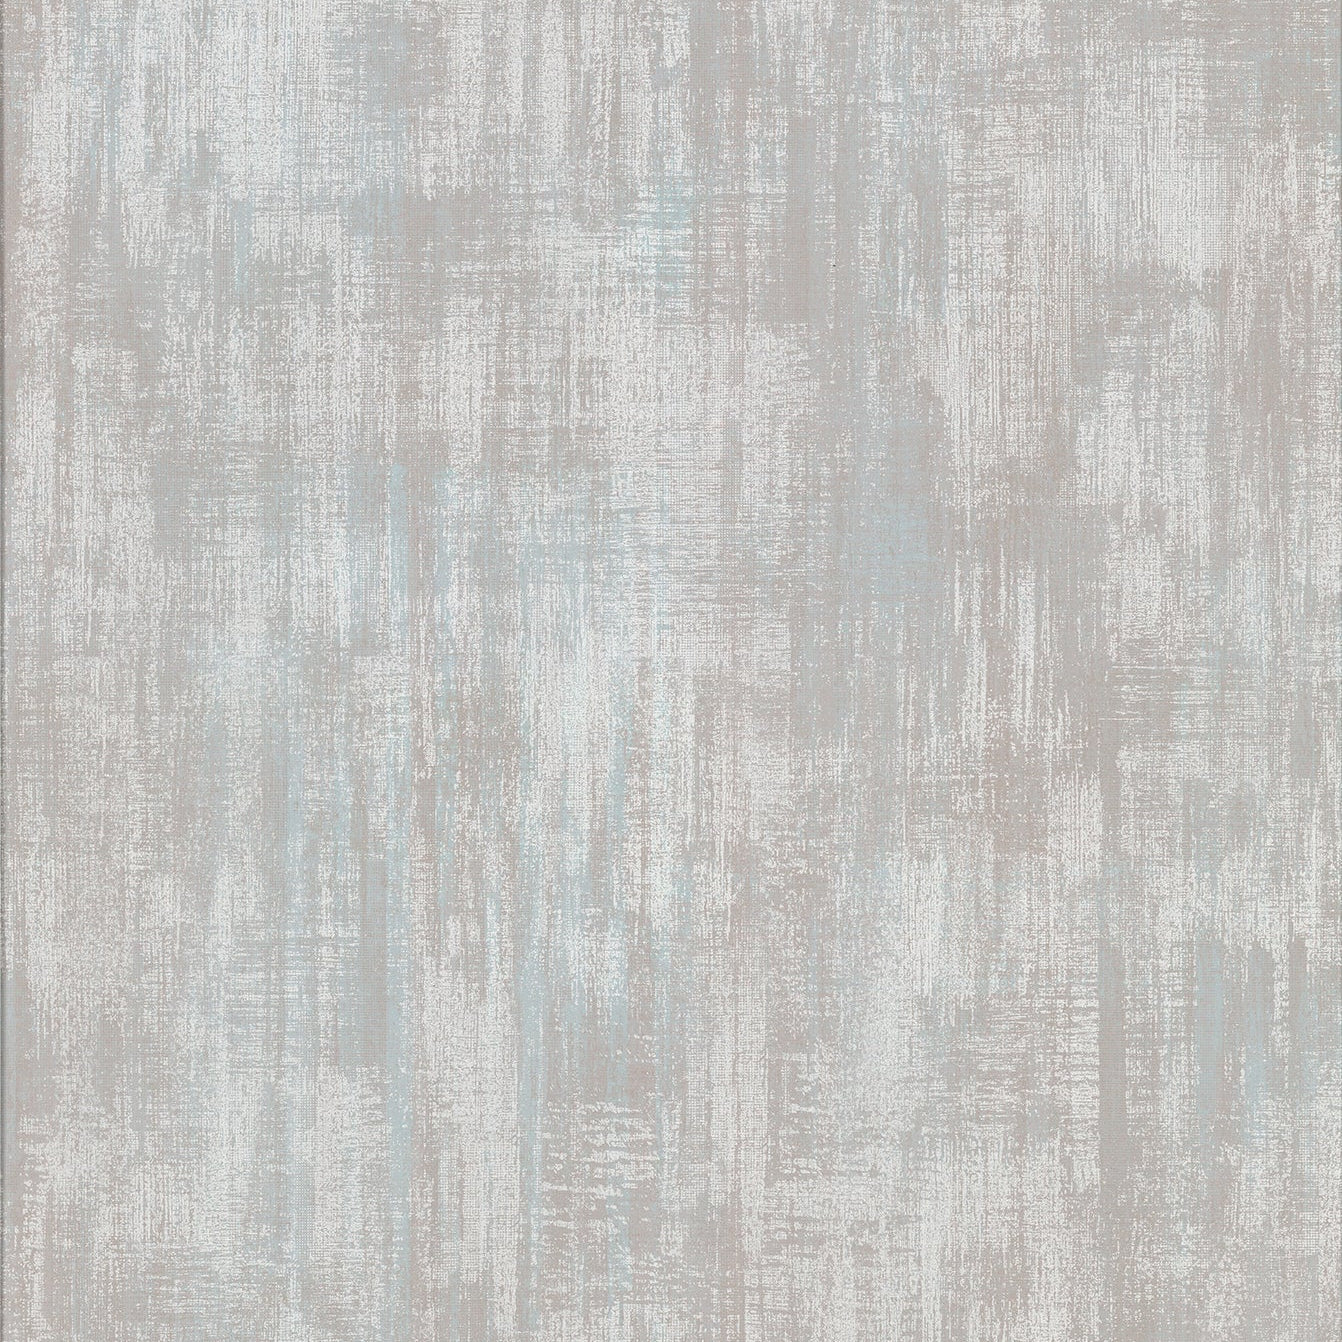 View 2959-AWIH-23002 Textural Essentials Cromwell Light Grey Distressed Texture Grey Brewster Wallpaper